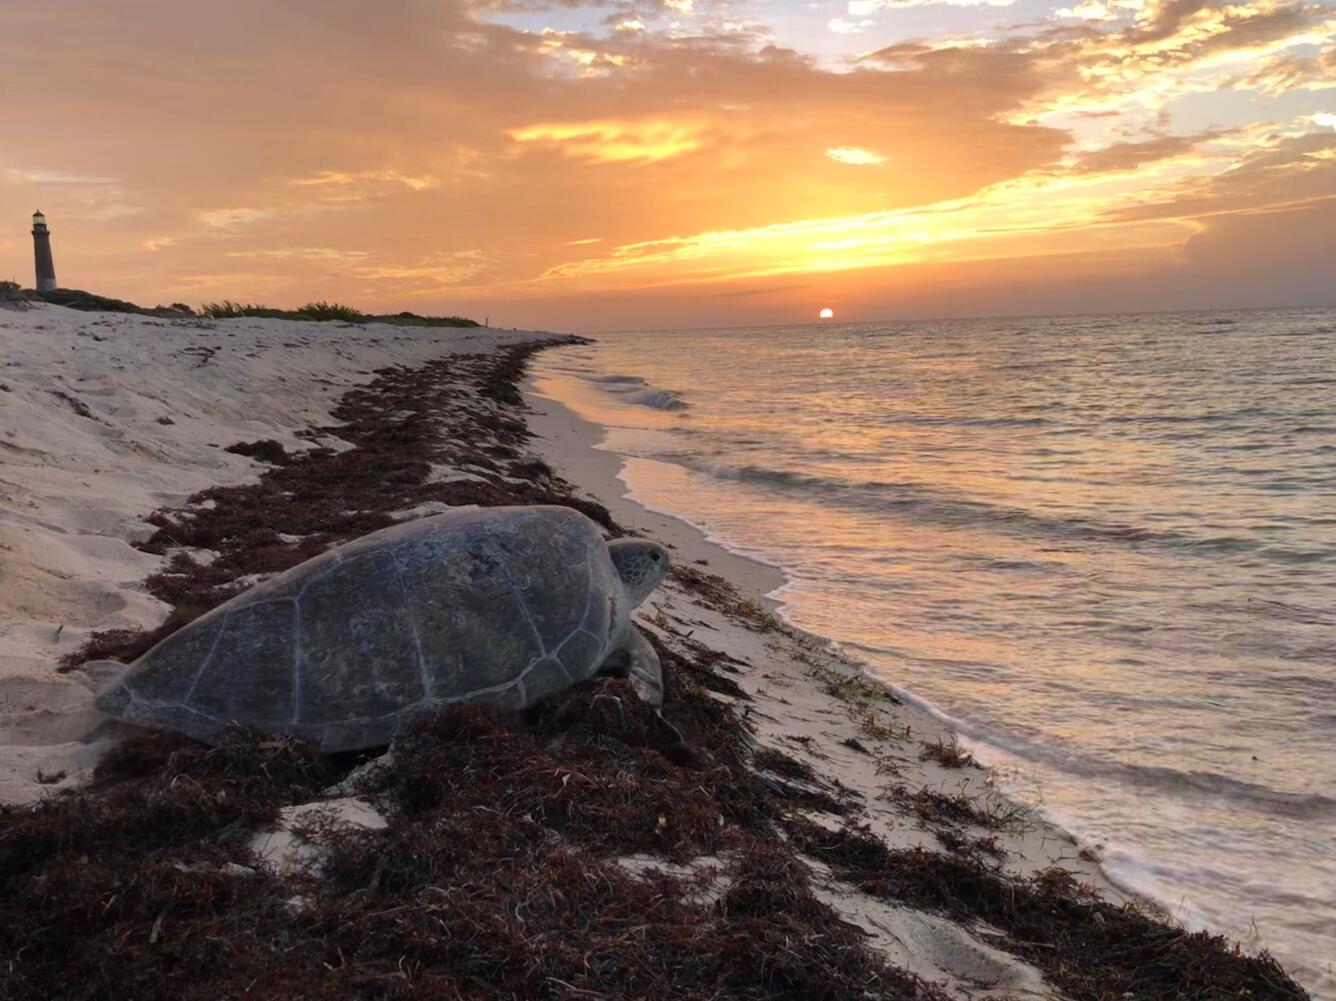 The sun rises as a female green sea turtle returns to the ocean after she lays her eggs.